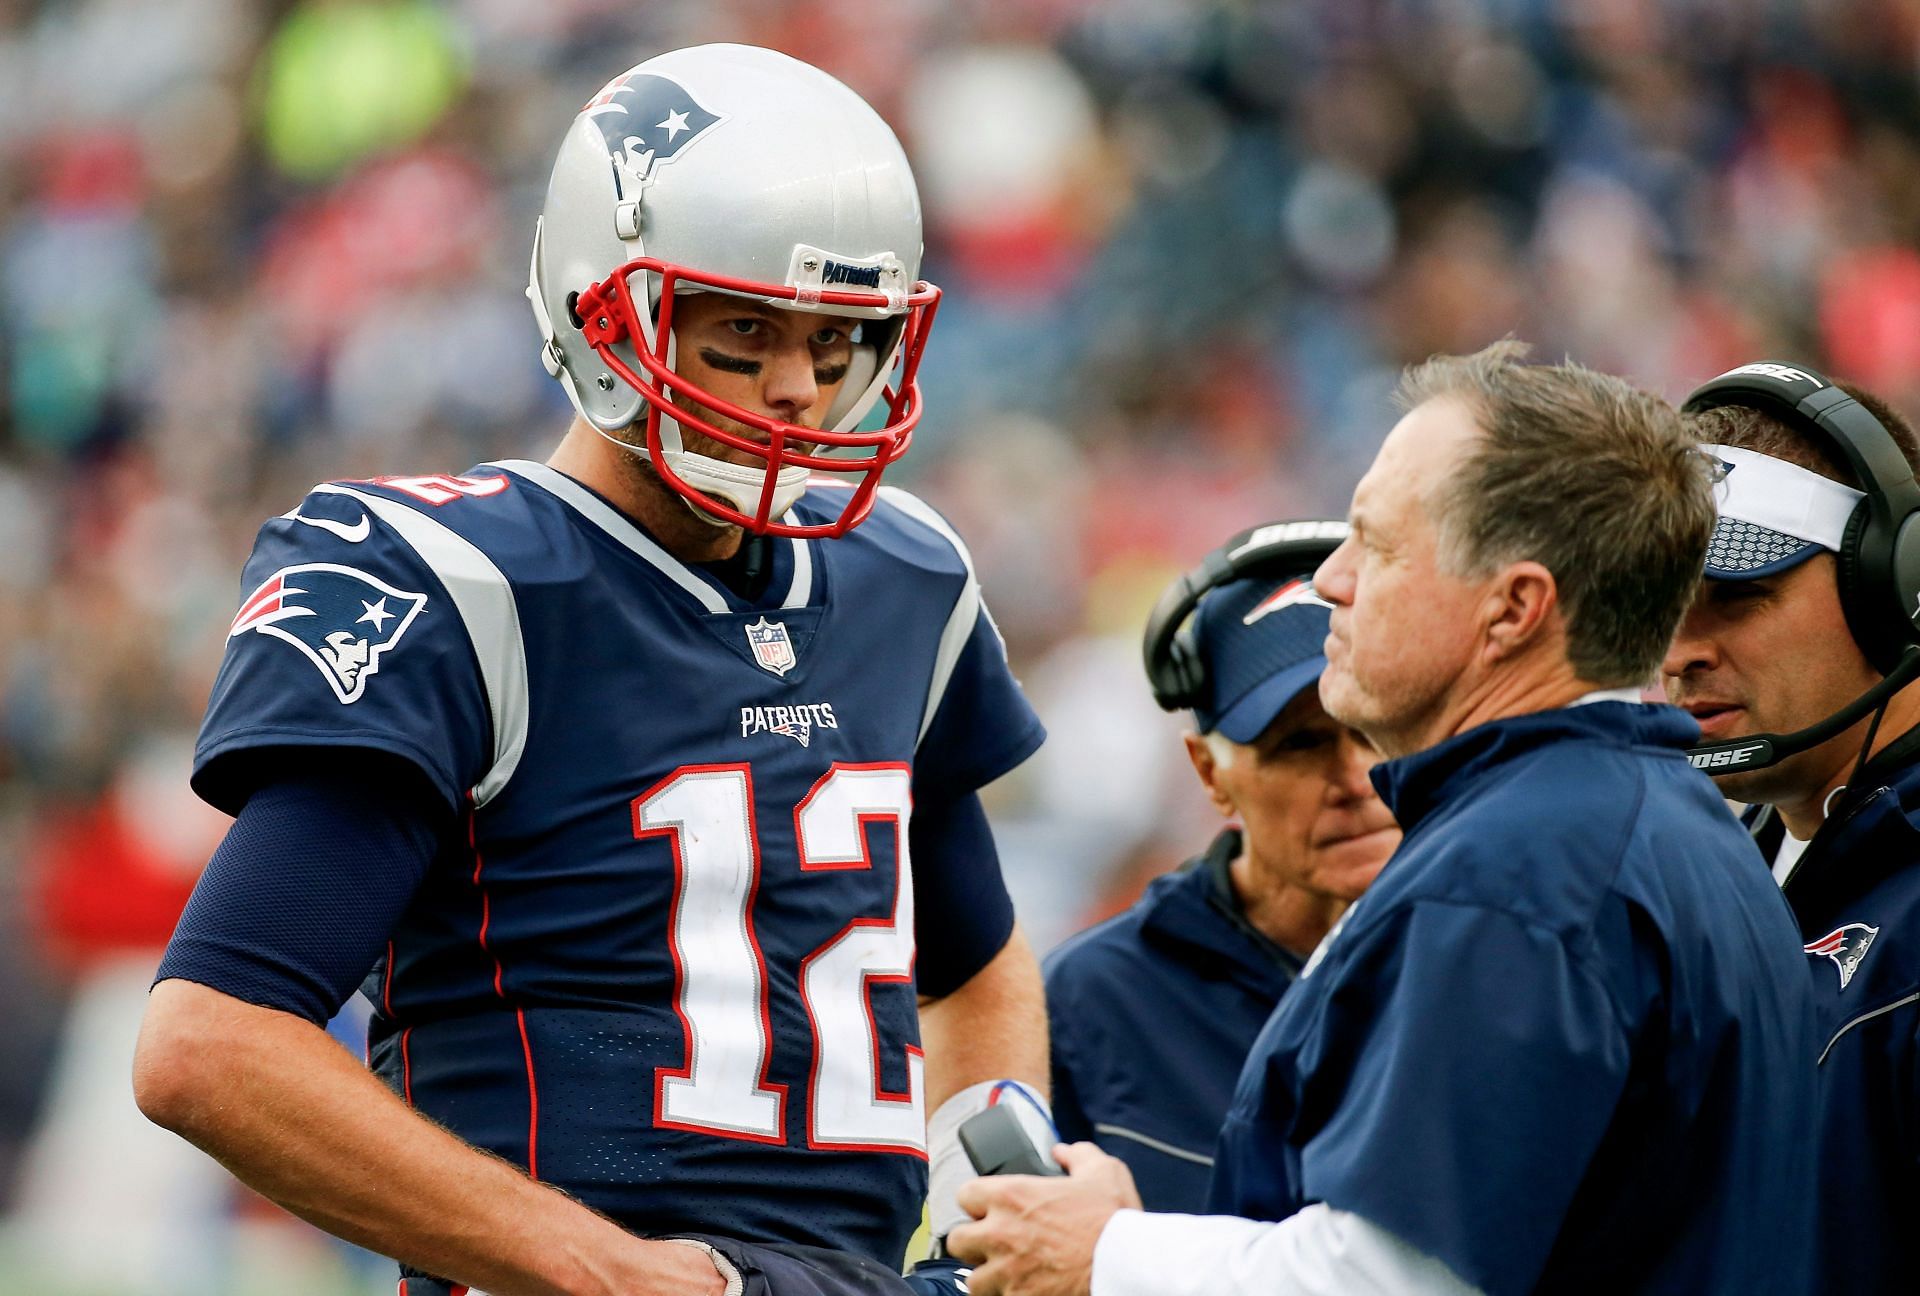 Brady and Belichick were the main reason the Patriots dominated for over a decade